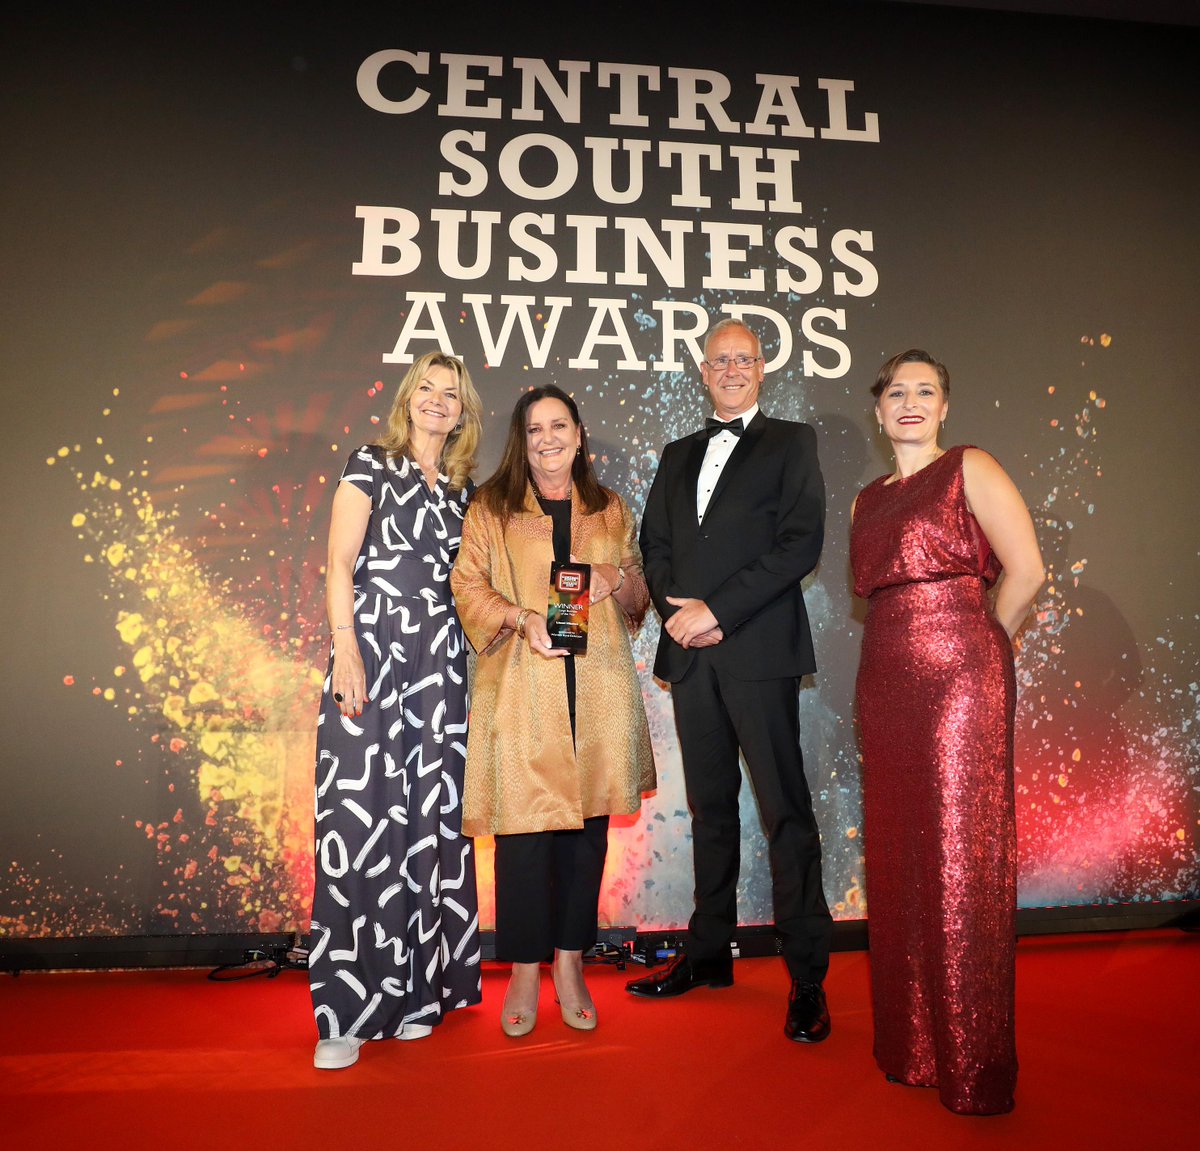 The Womble Bond Dickinson team recently attended the #CSBAwards, hosted at the Hilton at the Ageas Bowl, Southampton.

Congratulations to Lionel Hitchen, who won the Large Business of the Year Award, sponsored by Womble Bond Dickinson ▶️ ow.ly/qlxp104NPhC

#CentralSouthUK